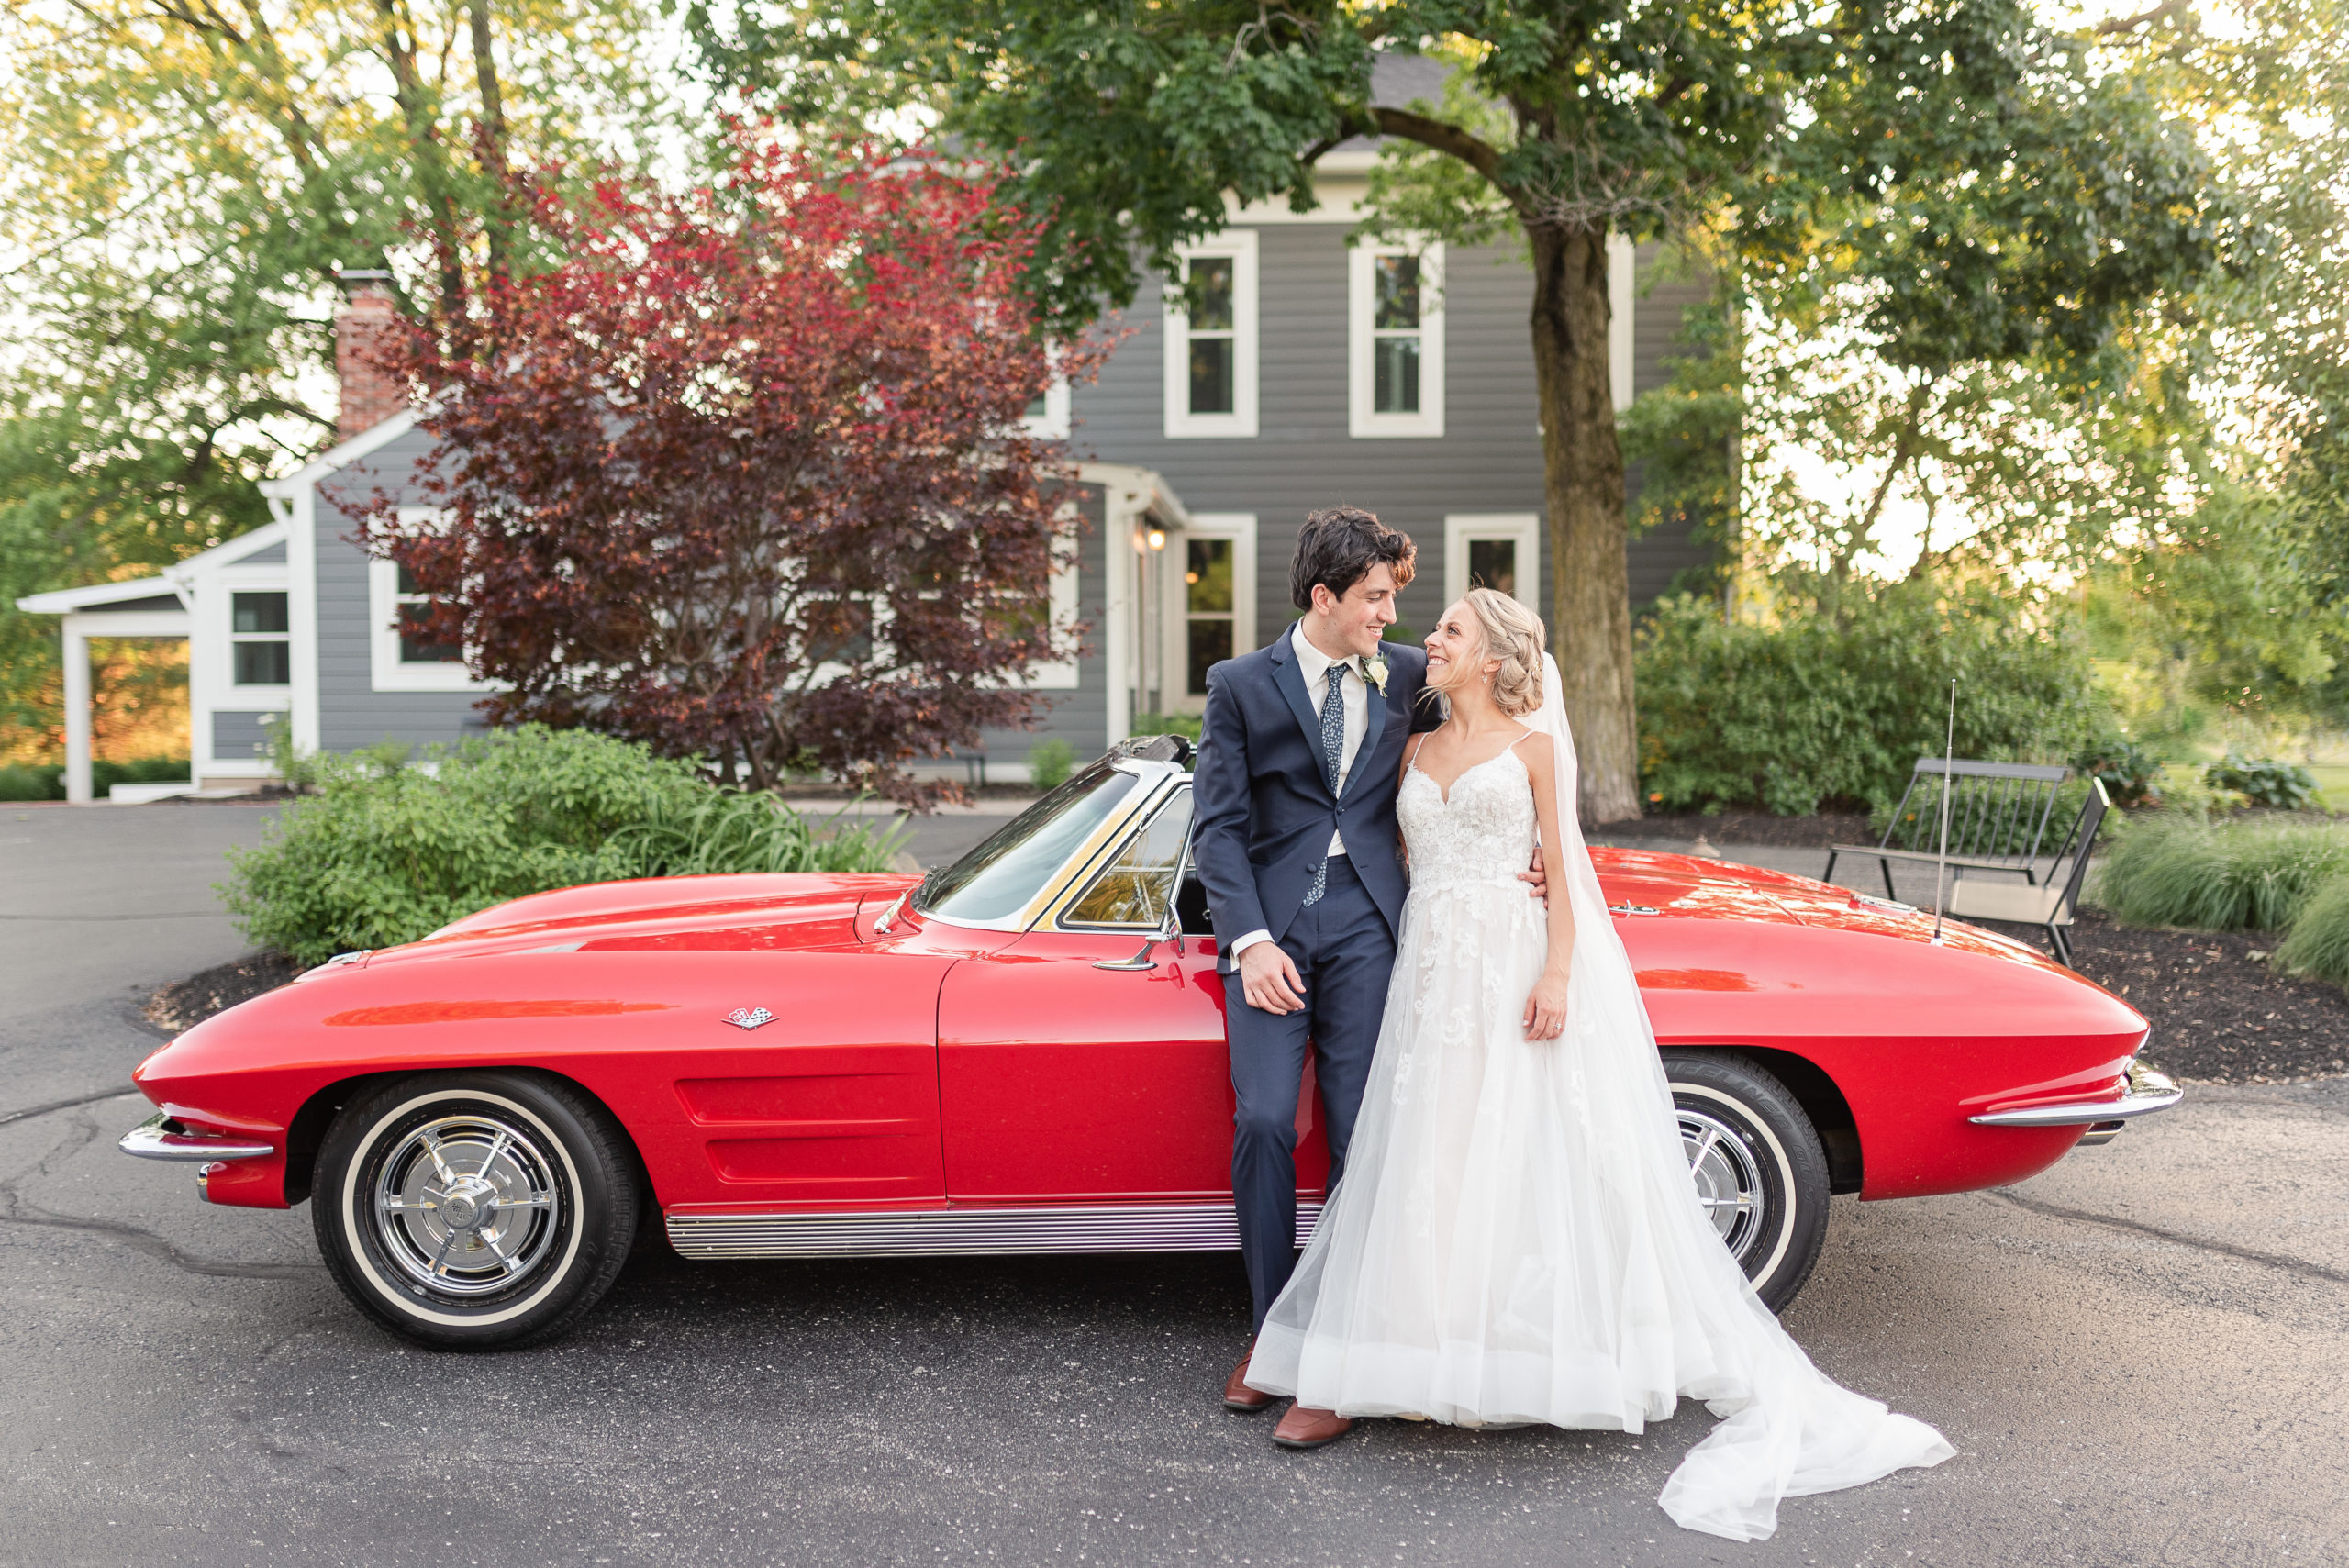 1963 Red Corvette Wedding Photos at Mustard Seed Gardens in Noblesville, IN